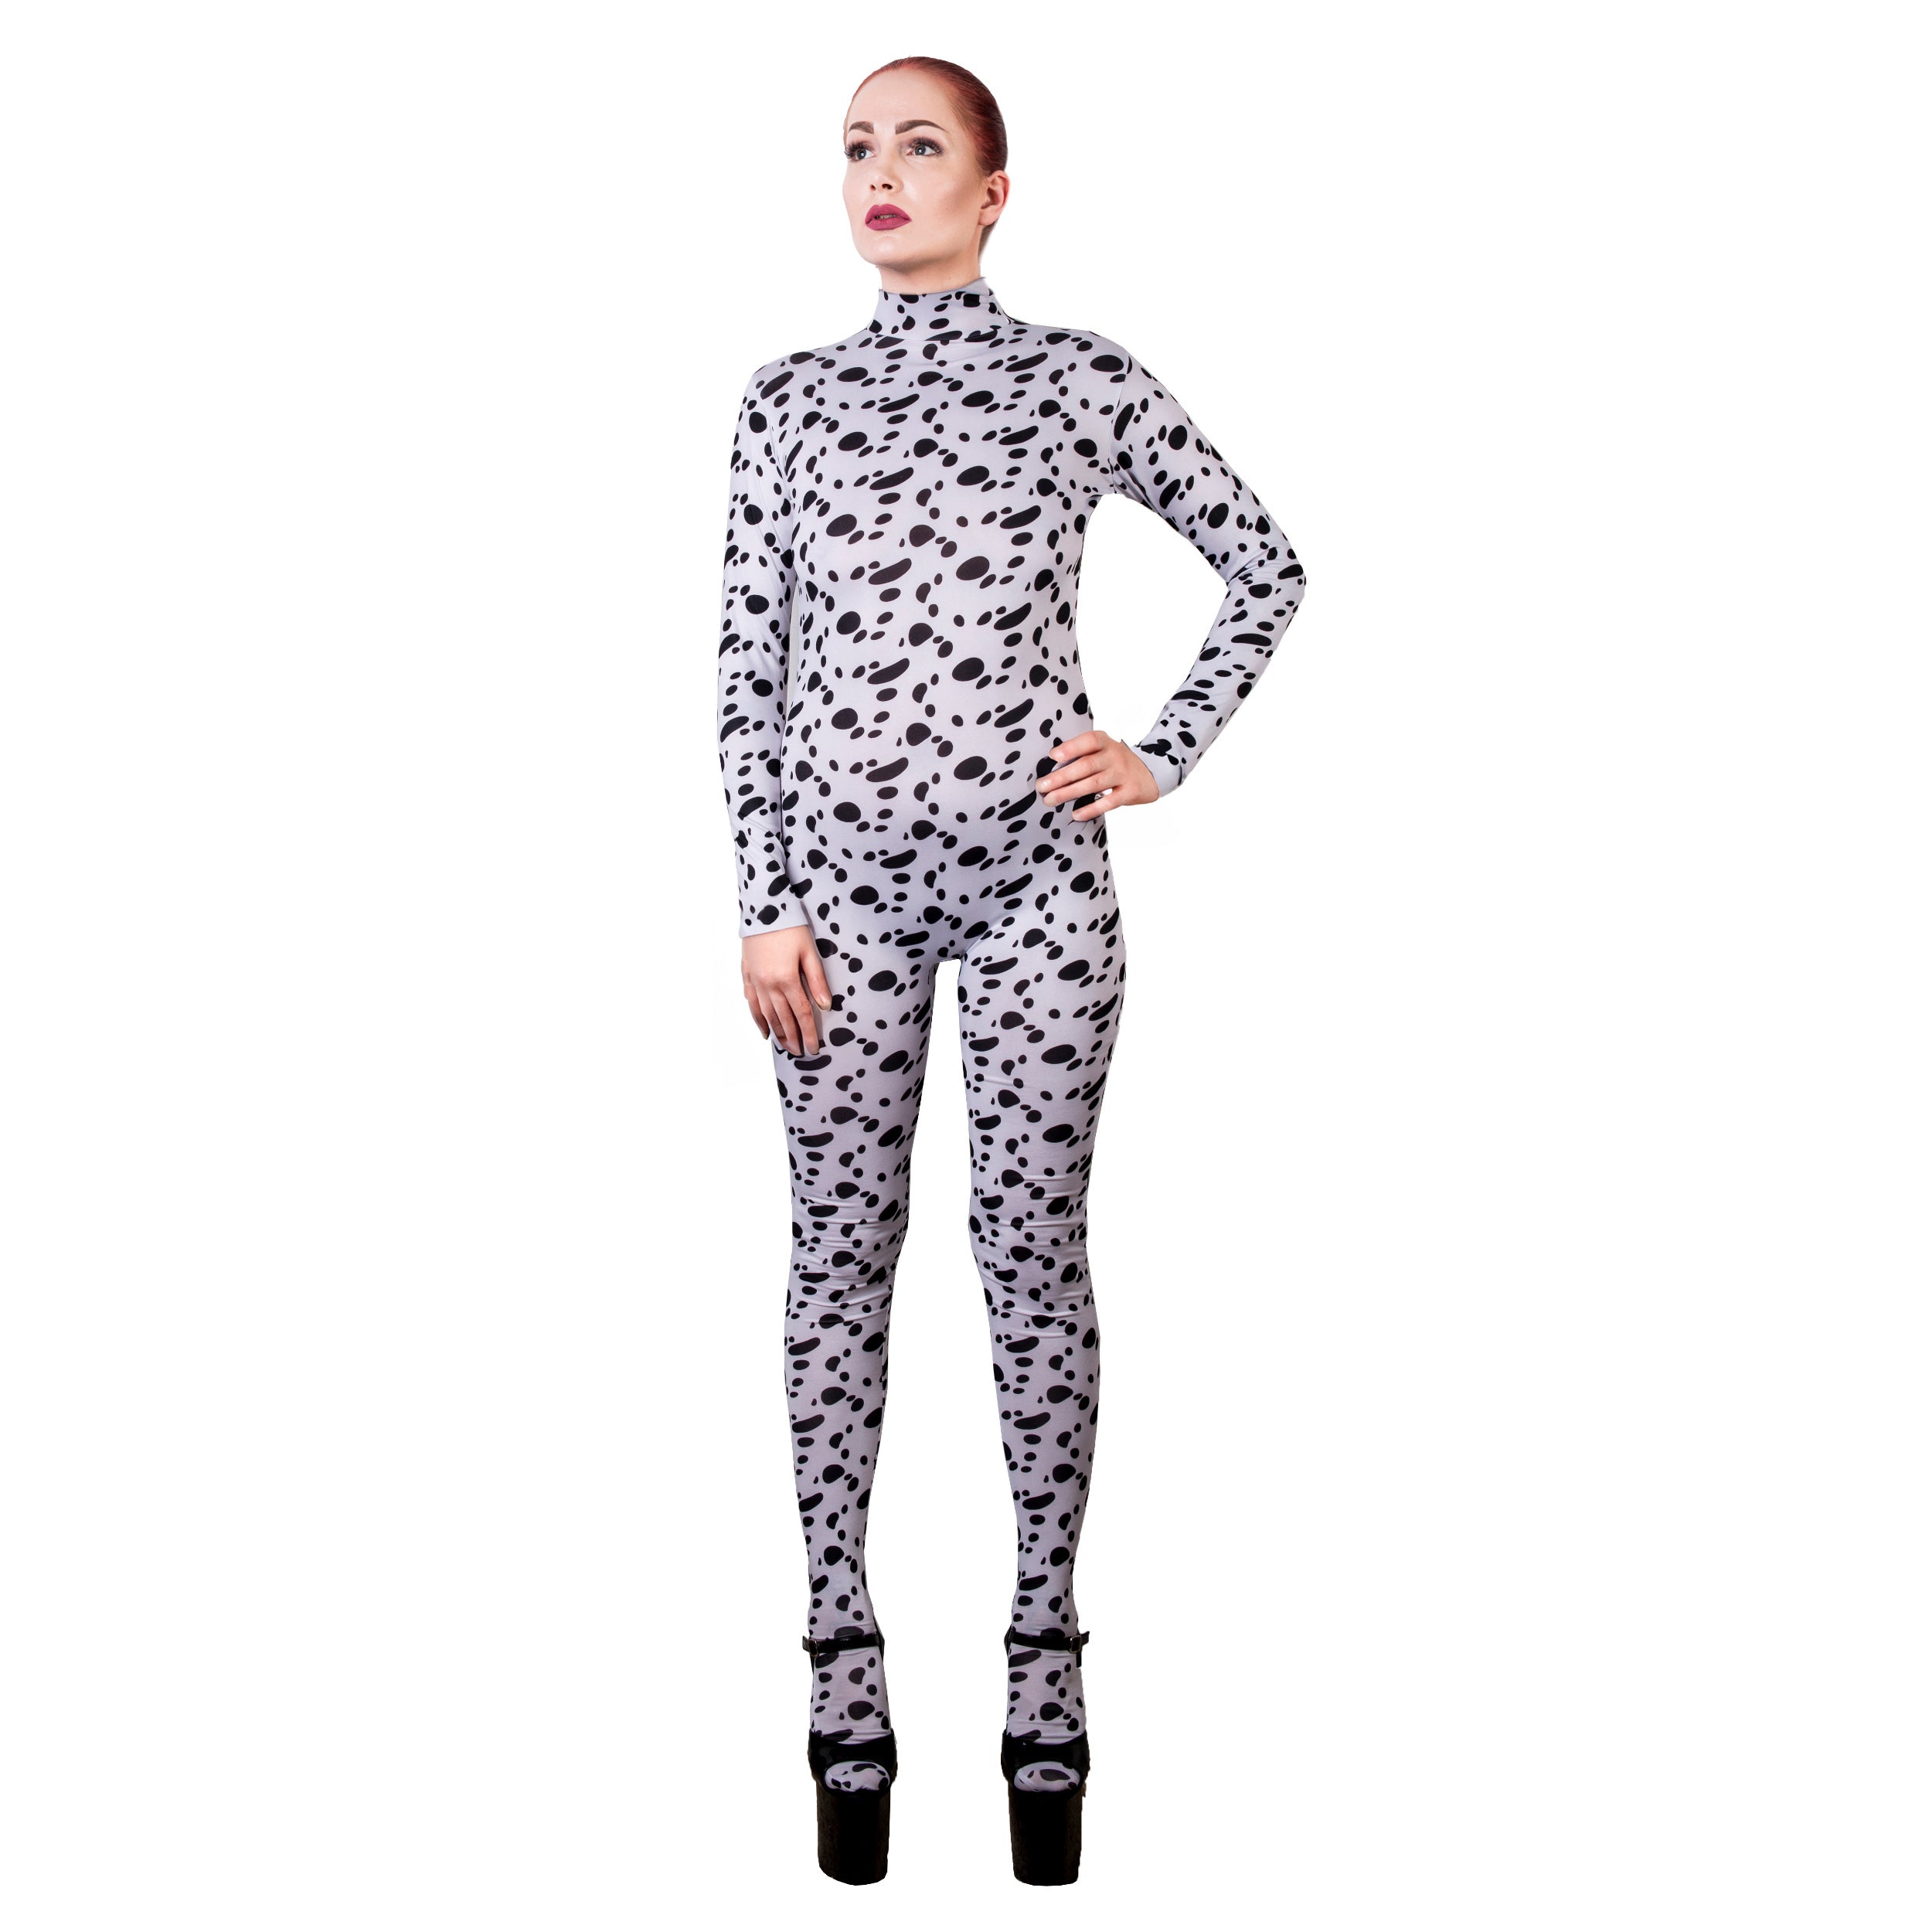 Rubberfashion Dalmatian Catsuit - Sexy Animal Dog Print Jumpsuit with Glove for Women and Men